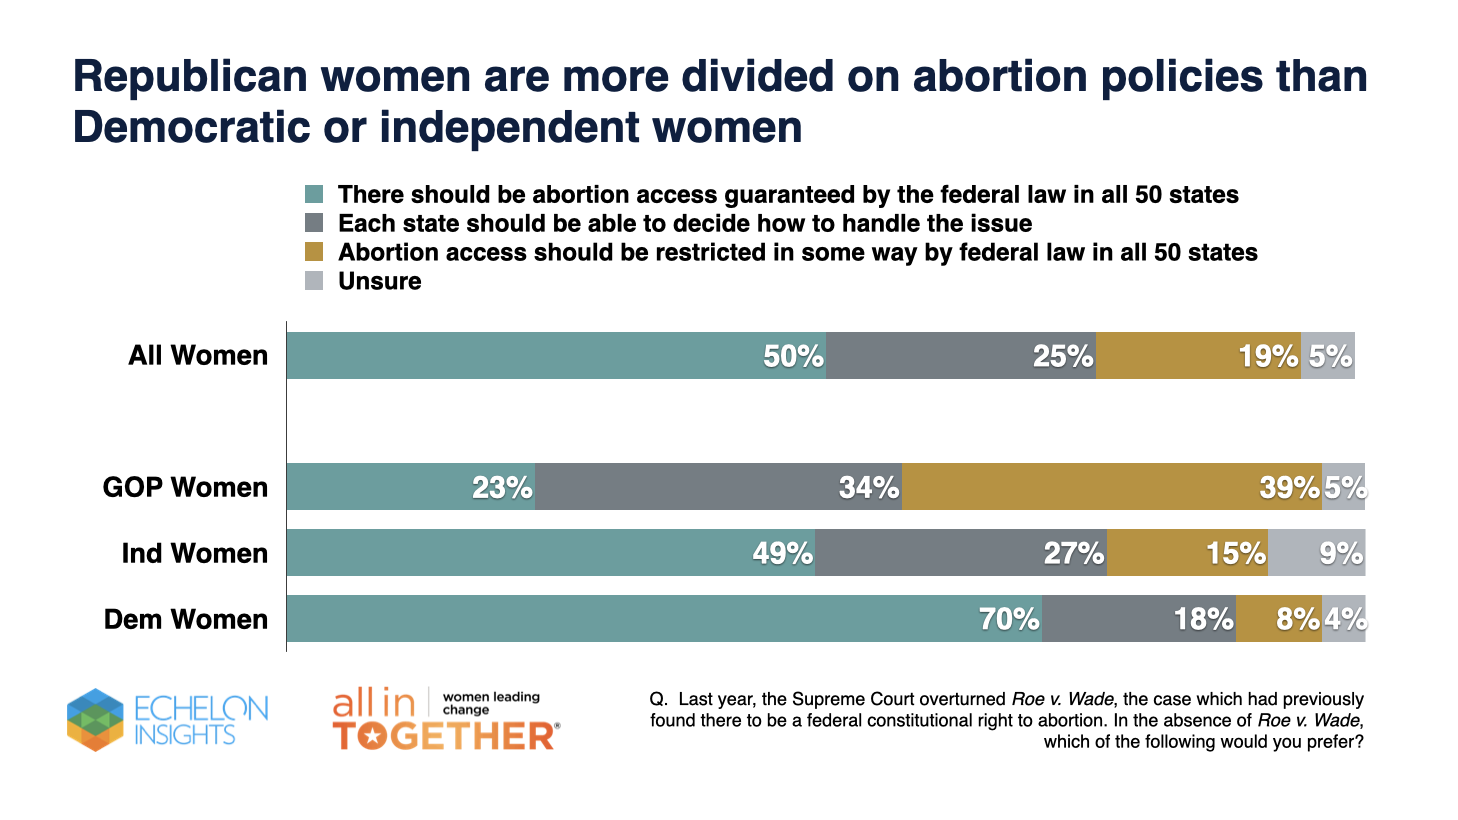 chart showing levels of support for policies relating to abortion access for women by political party affiliation 